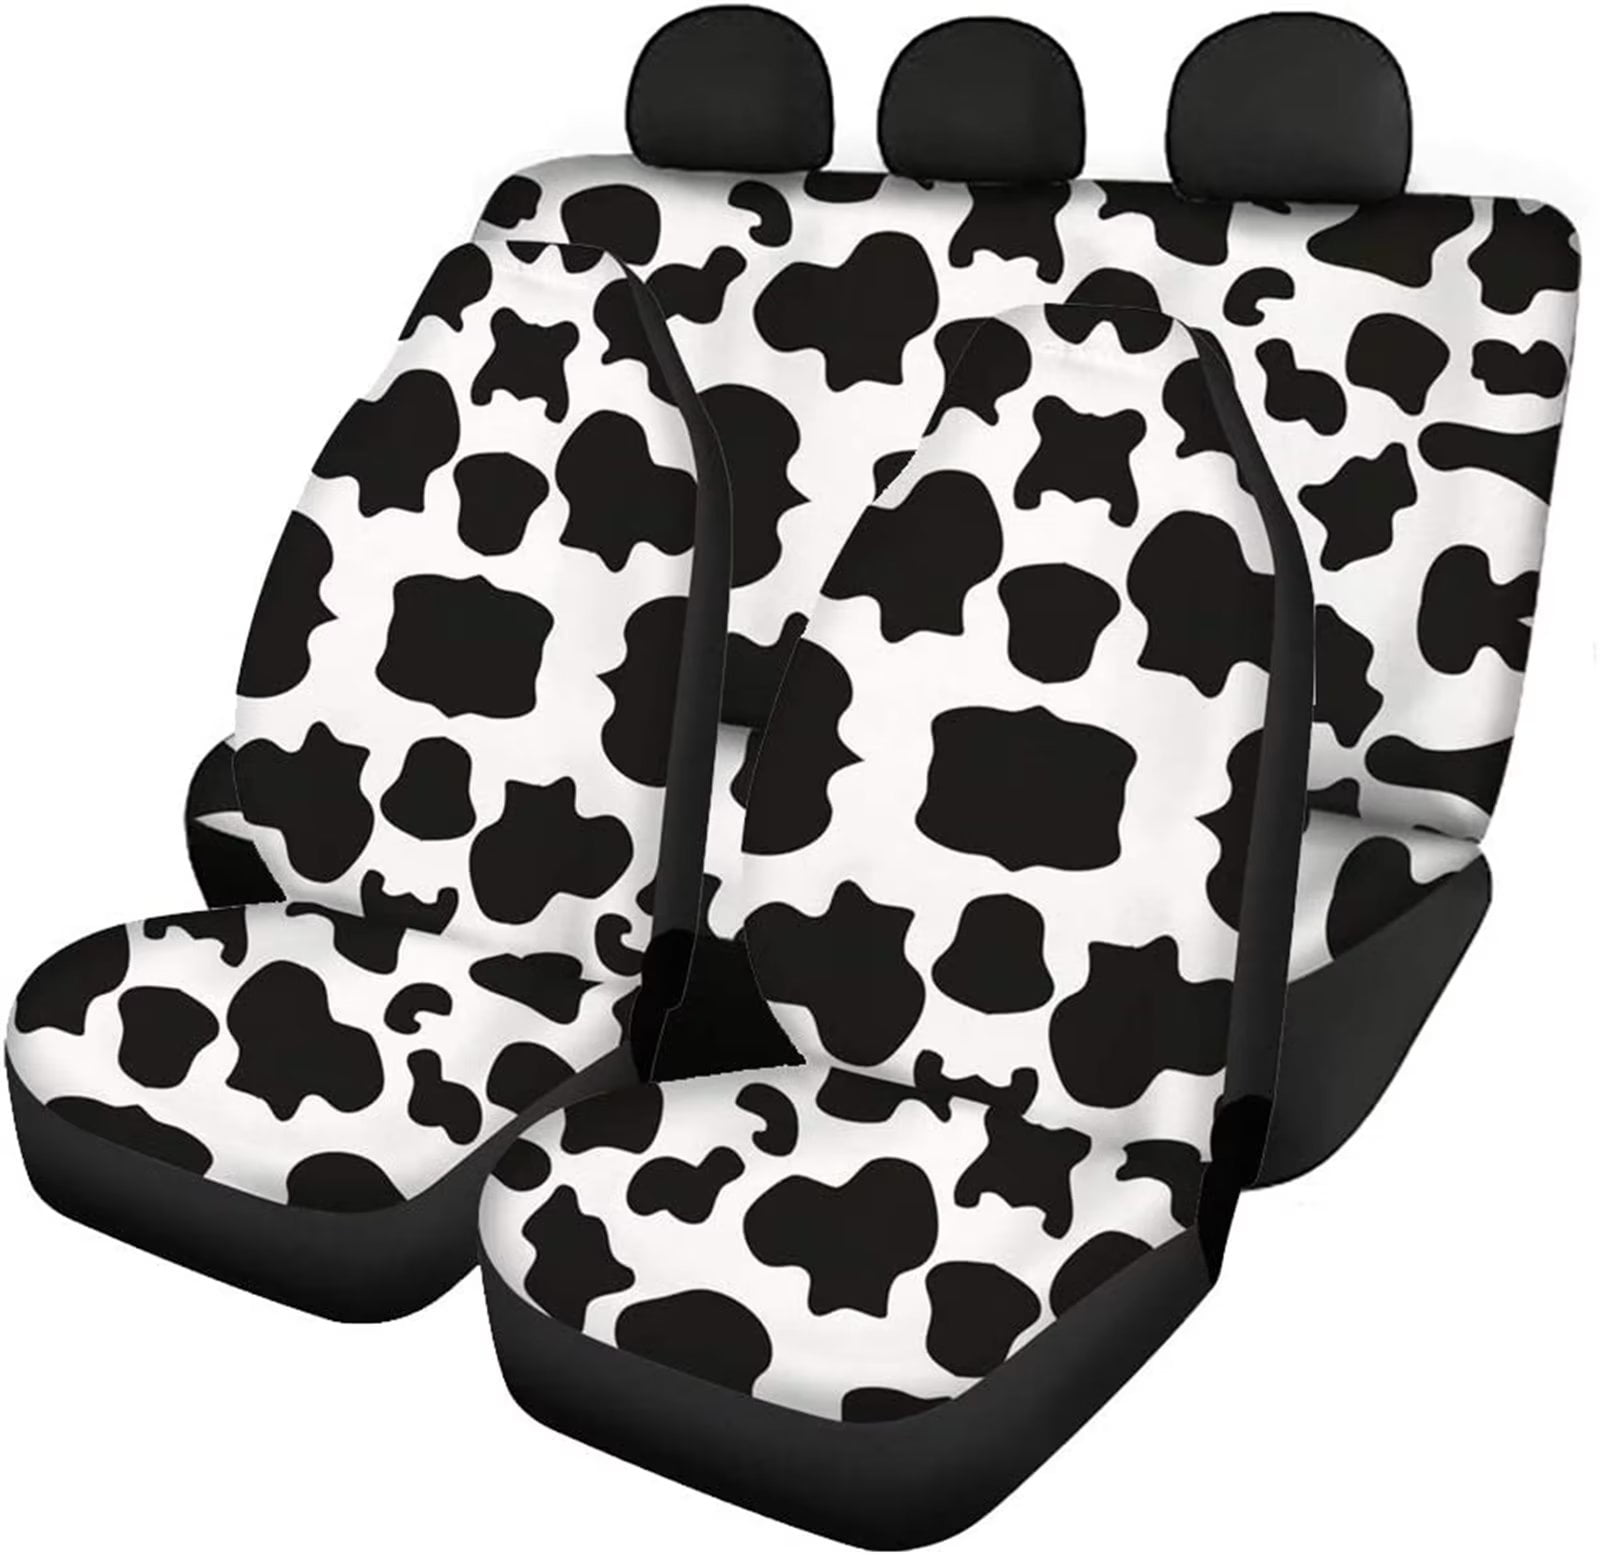 FKELYI Cute Car Seat Covers Set of 4pcs Cow Print,Stretchy Soft